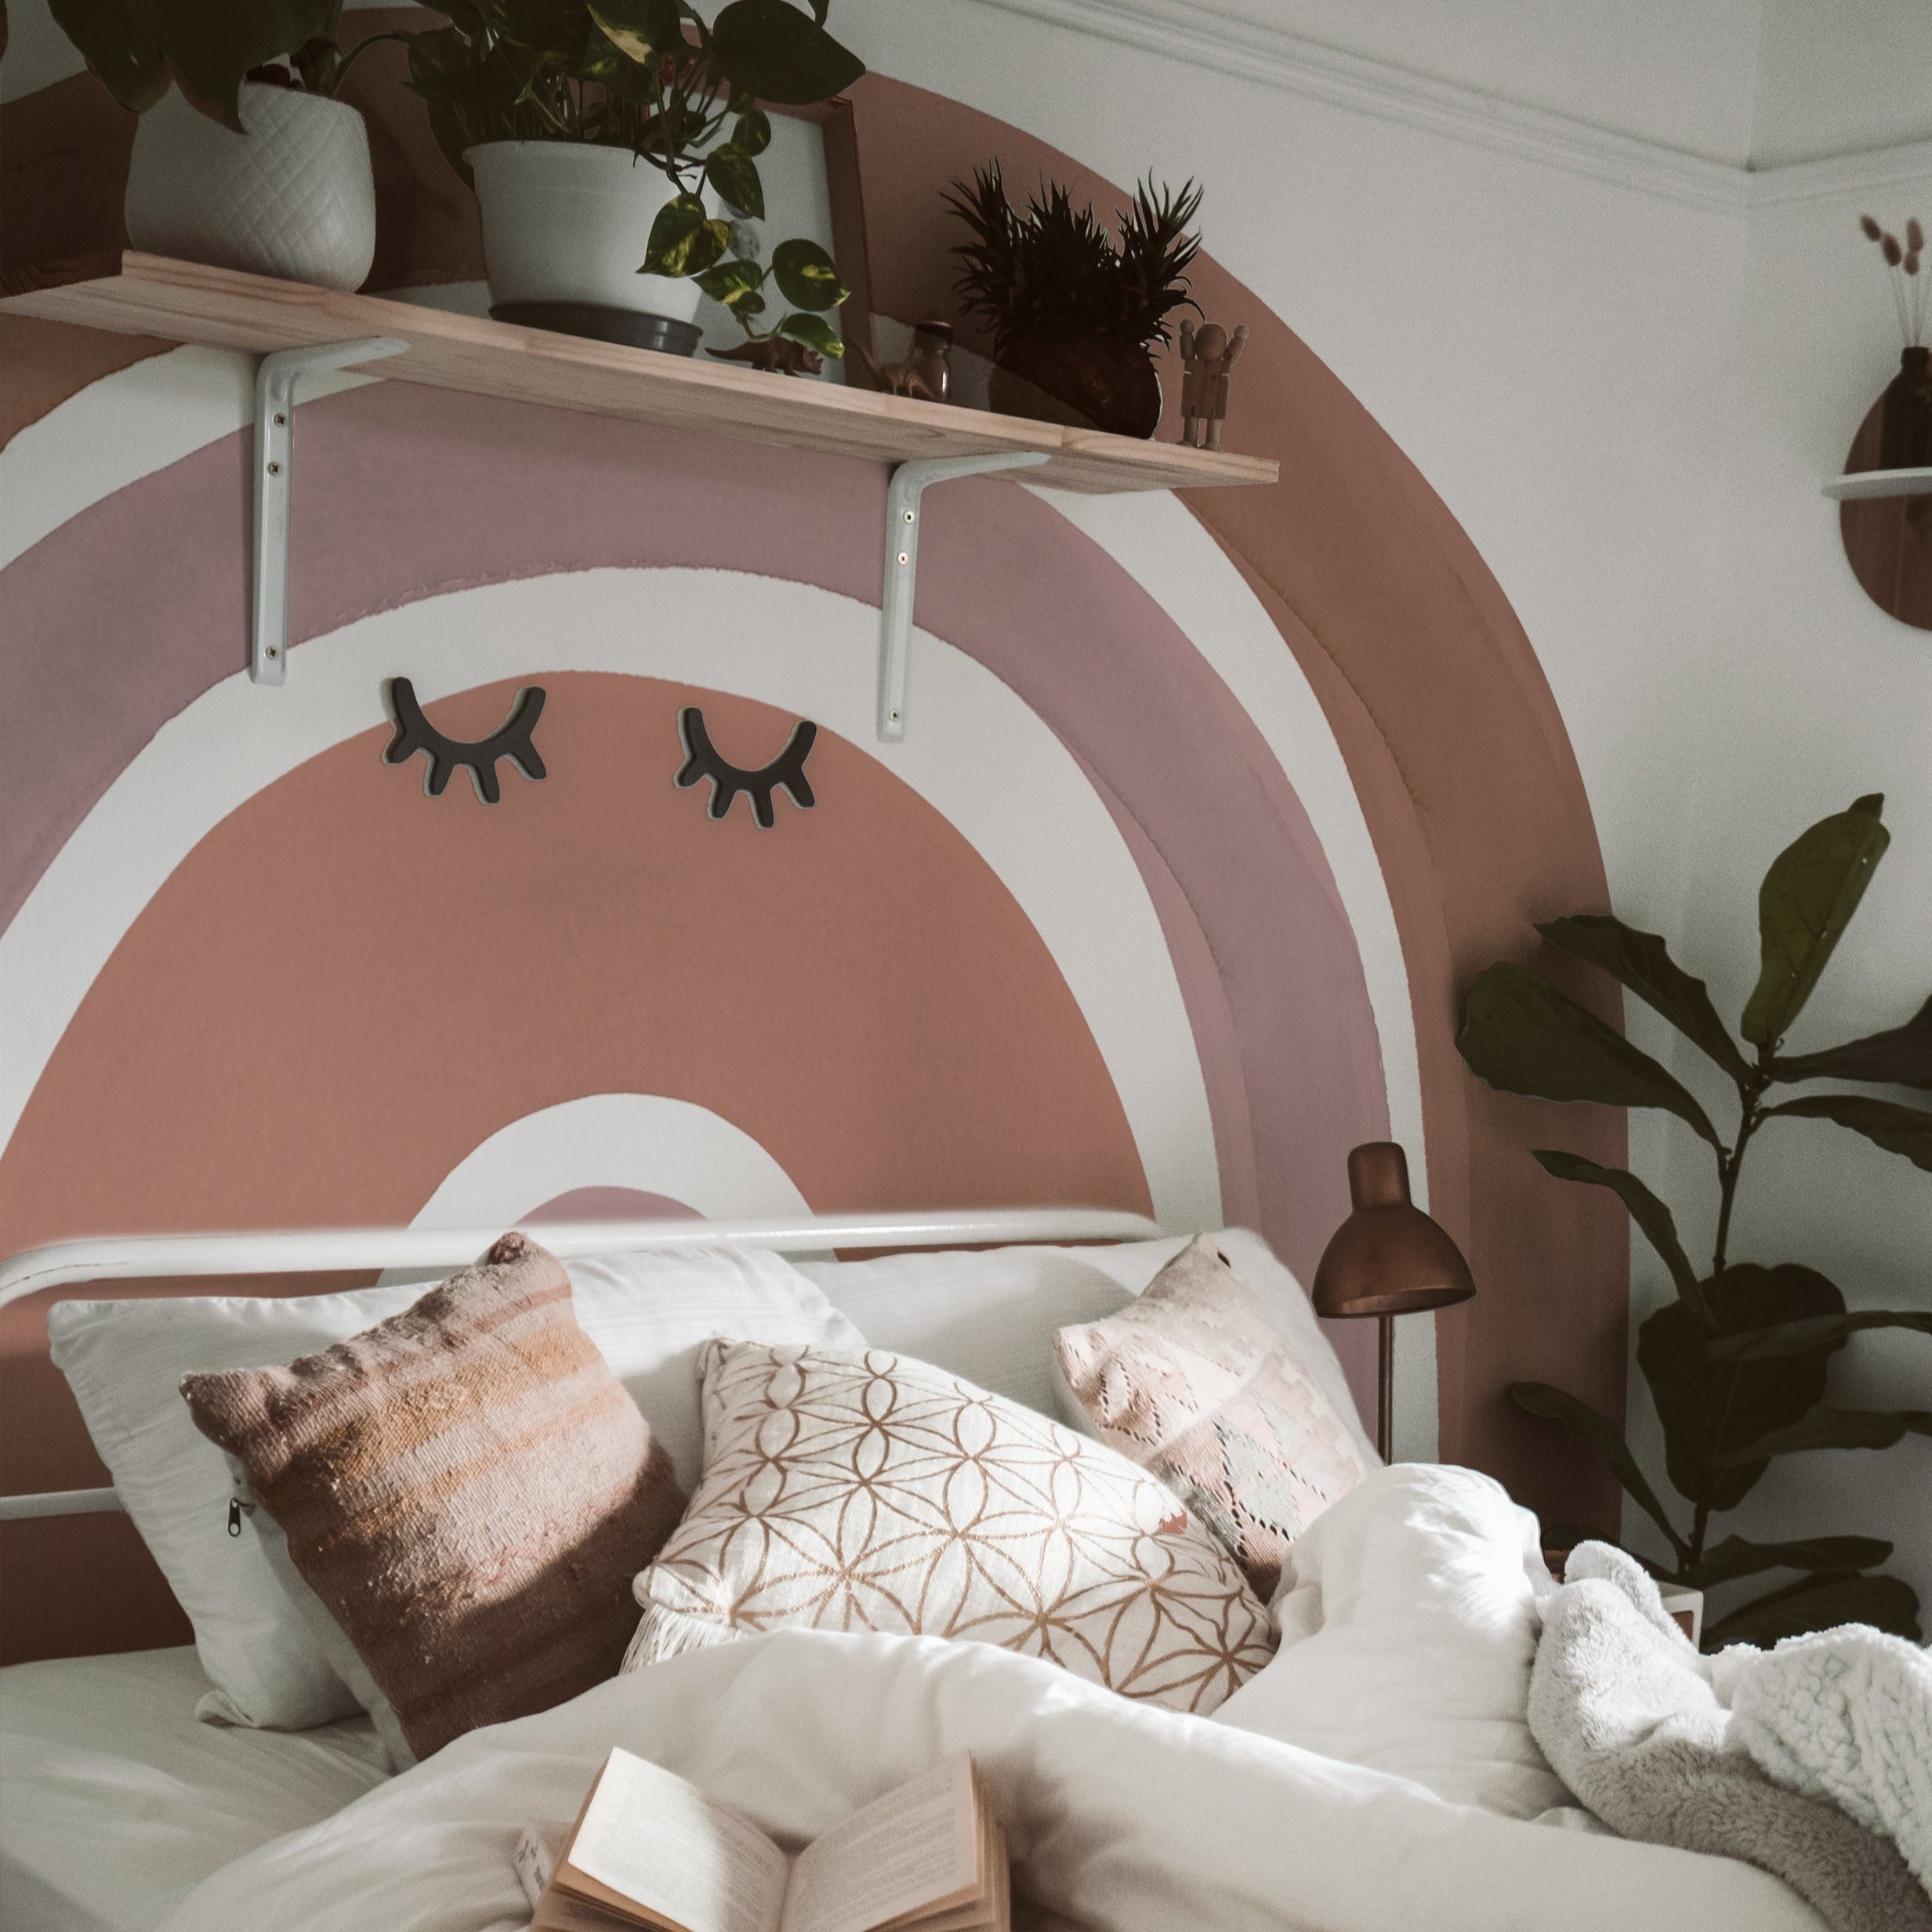 A cozy bedroom setting showcasing the Aesthetic Rainbow Wallpaper Mural - Luna. The mural features large, soft arches in muted tones of brown and pink, providing a warm backdrop. Decorated with plants and cozy bedding, this space reflects a tranquil and stylish ambiance.